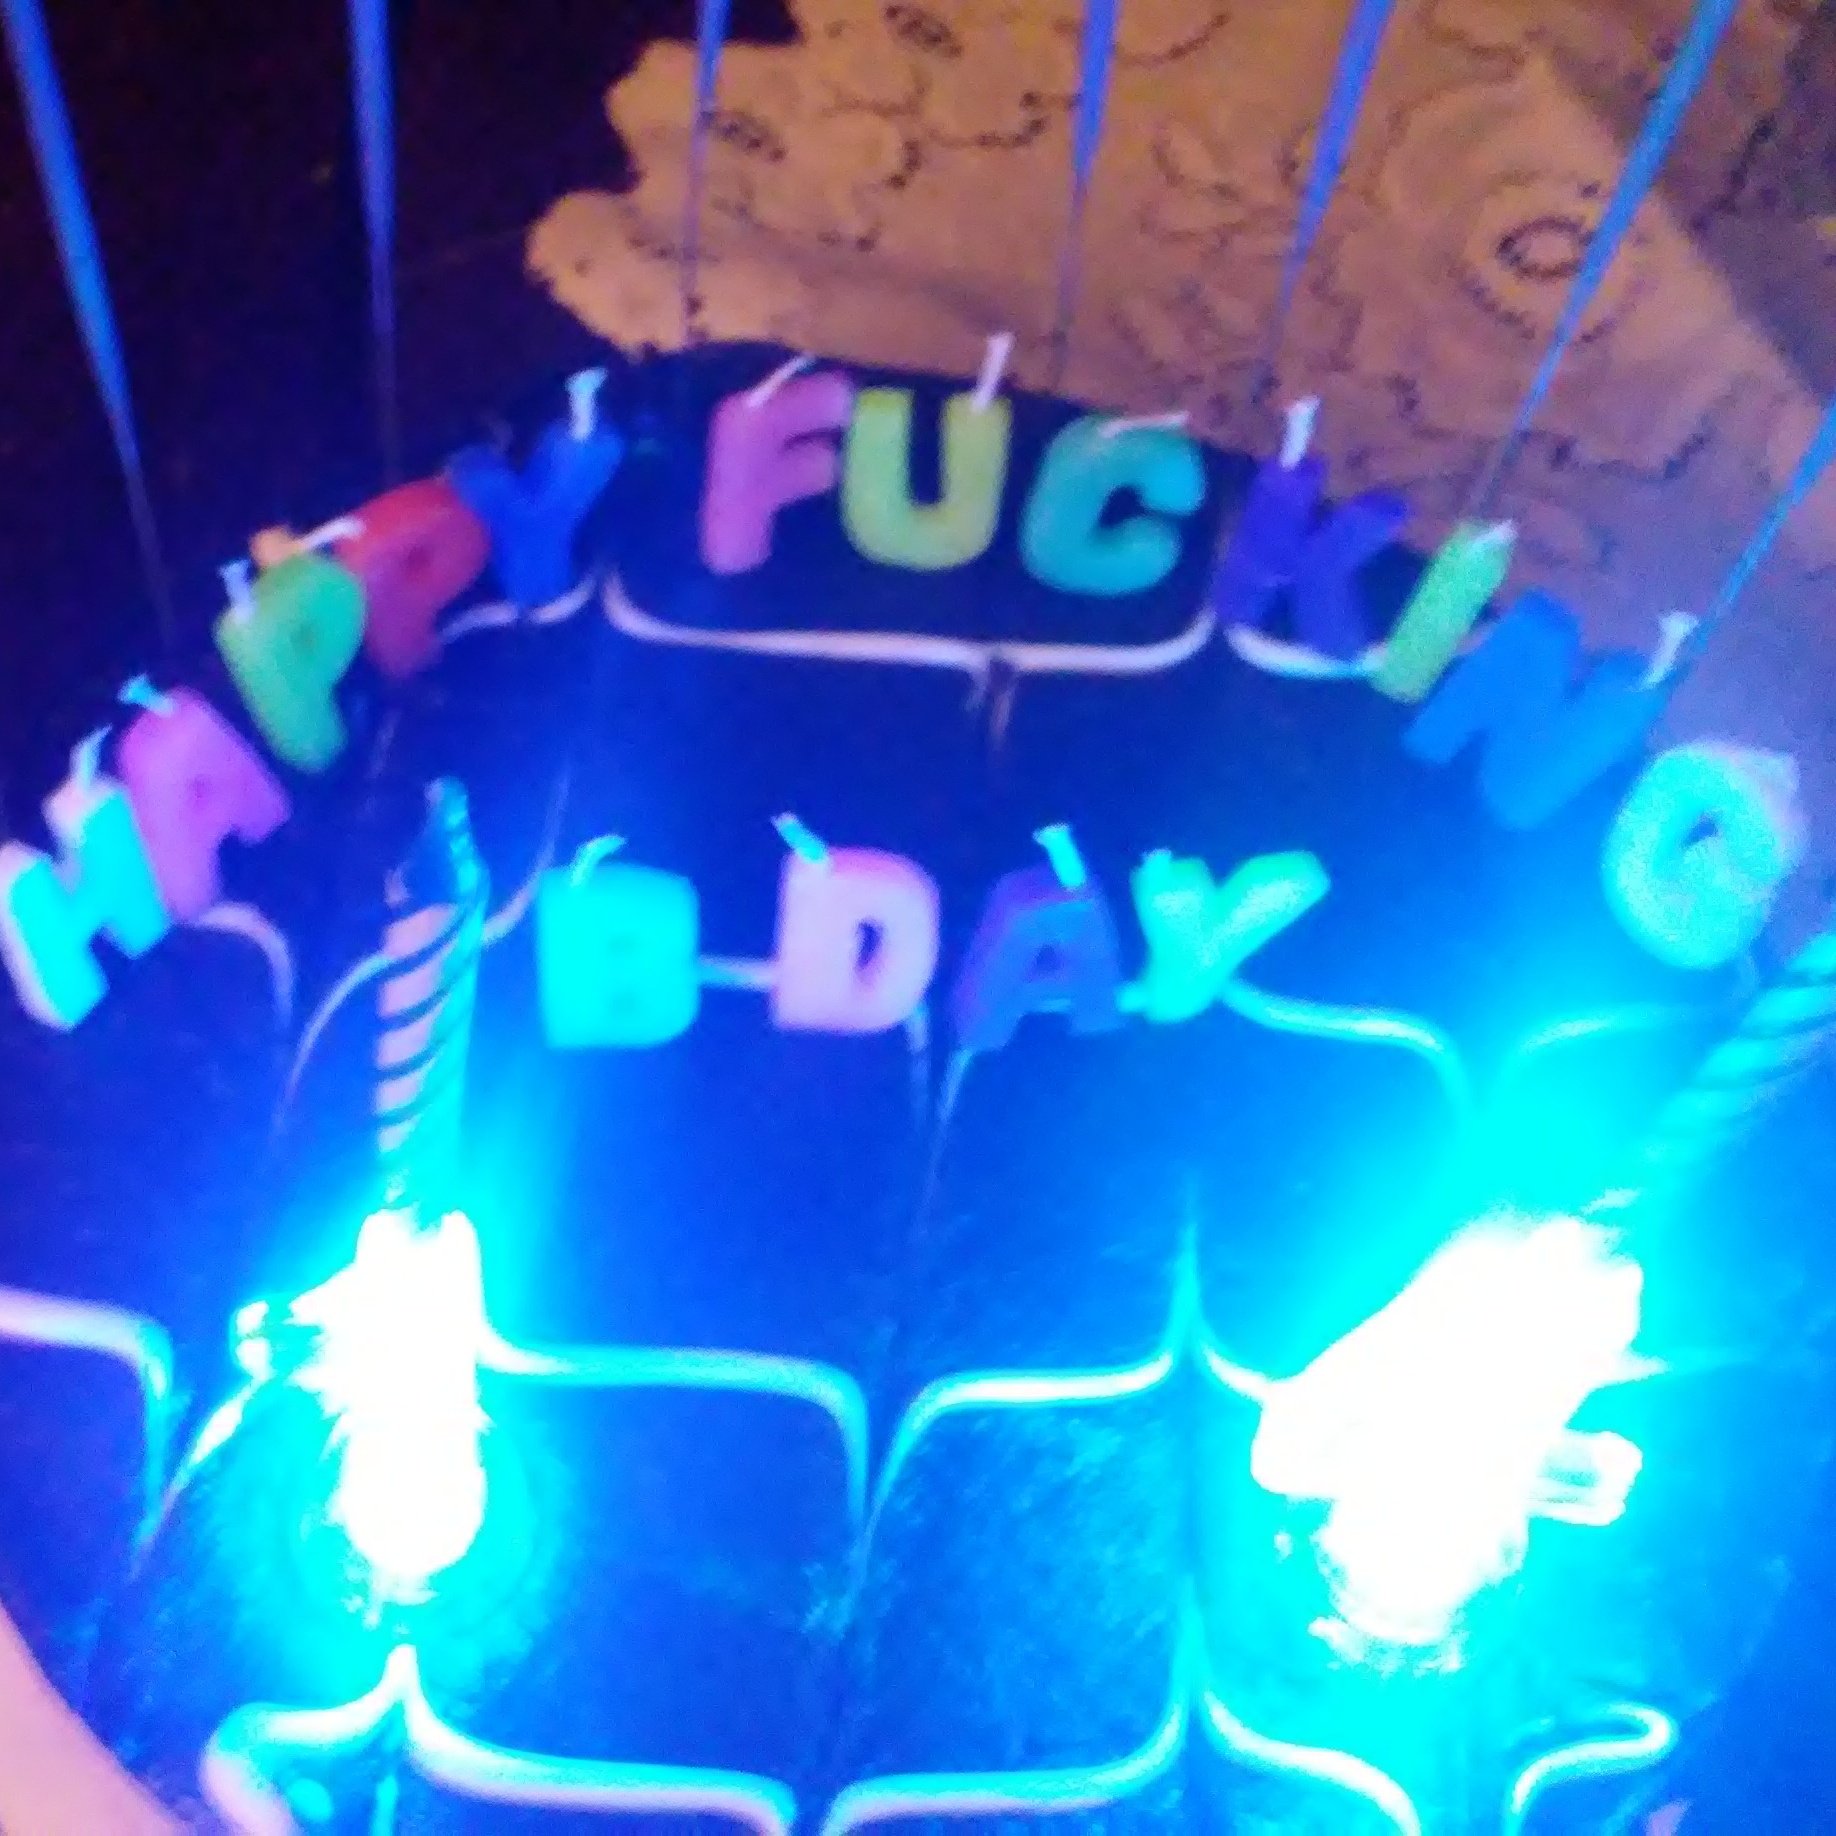 Inappropriate but funny! He loved it and took a pic of his cake. Happy birthday Bob, love you little man! 